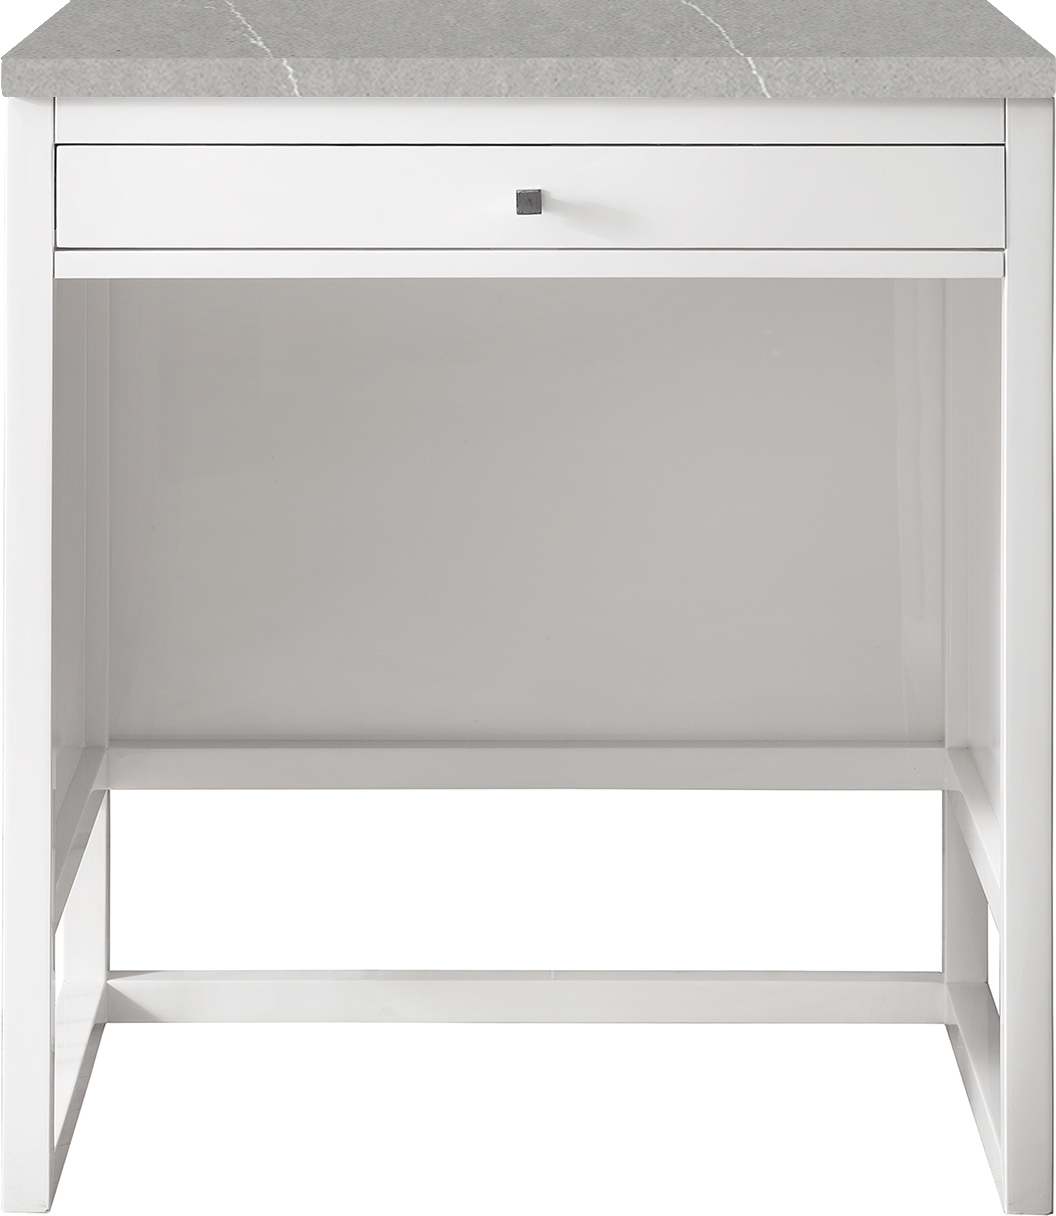 48 in white vanity James Martin Countertop Unit Traditional